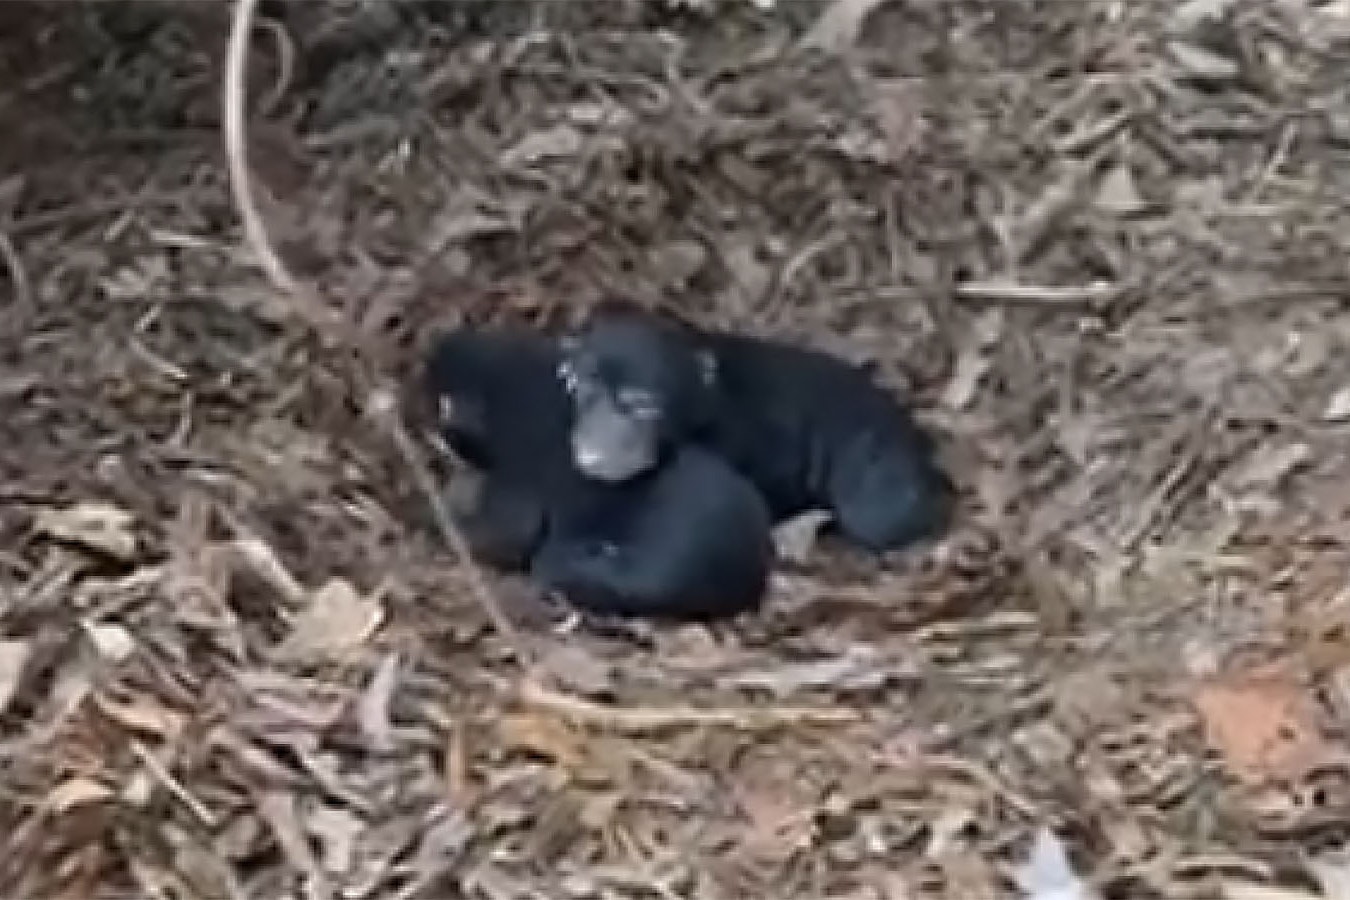 A pair of newborn black bears found while shed hunting in this image from video.